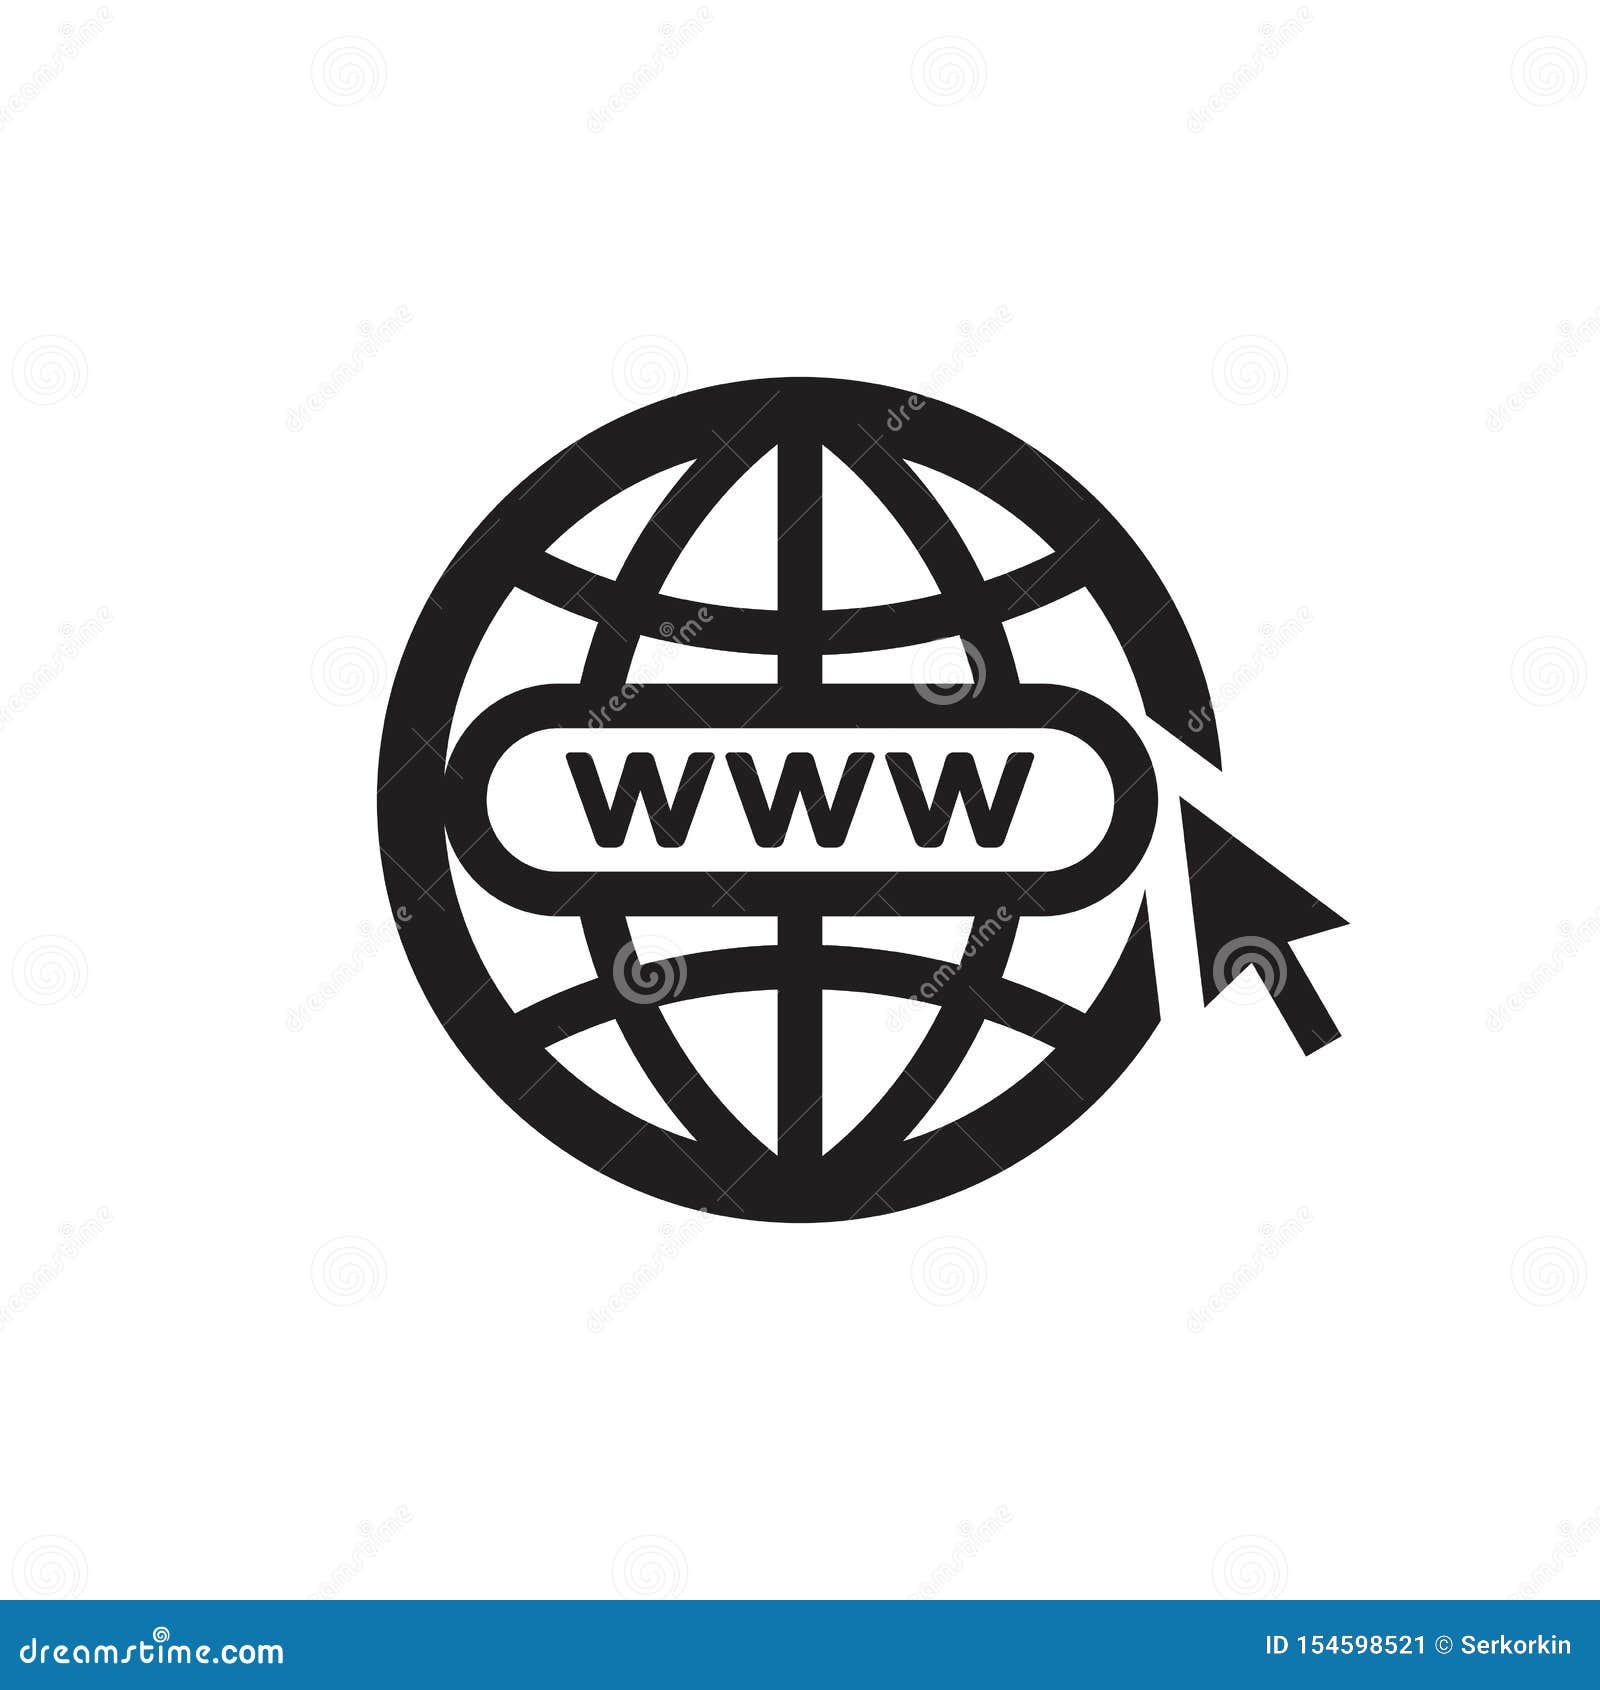 www globe with arrow - black icon on white background   for website, mobile application, presentation, infograph